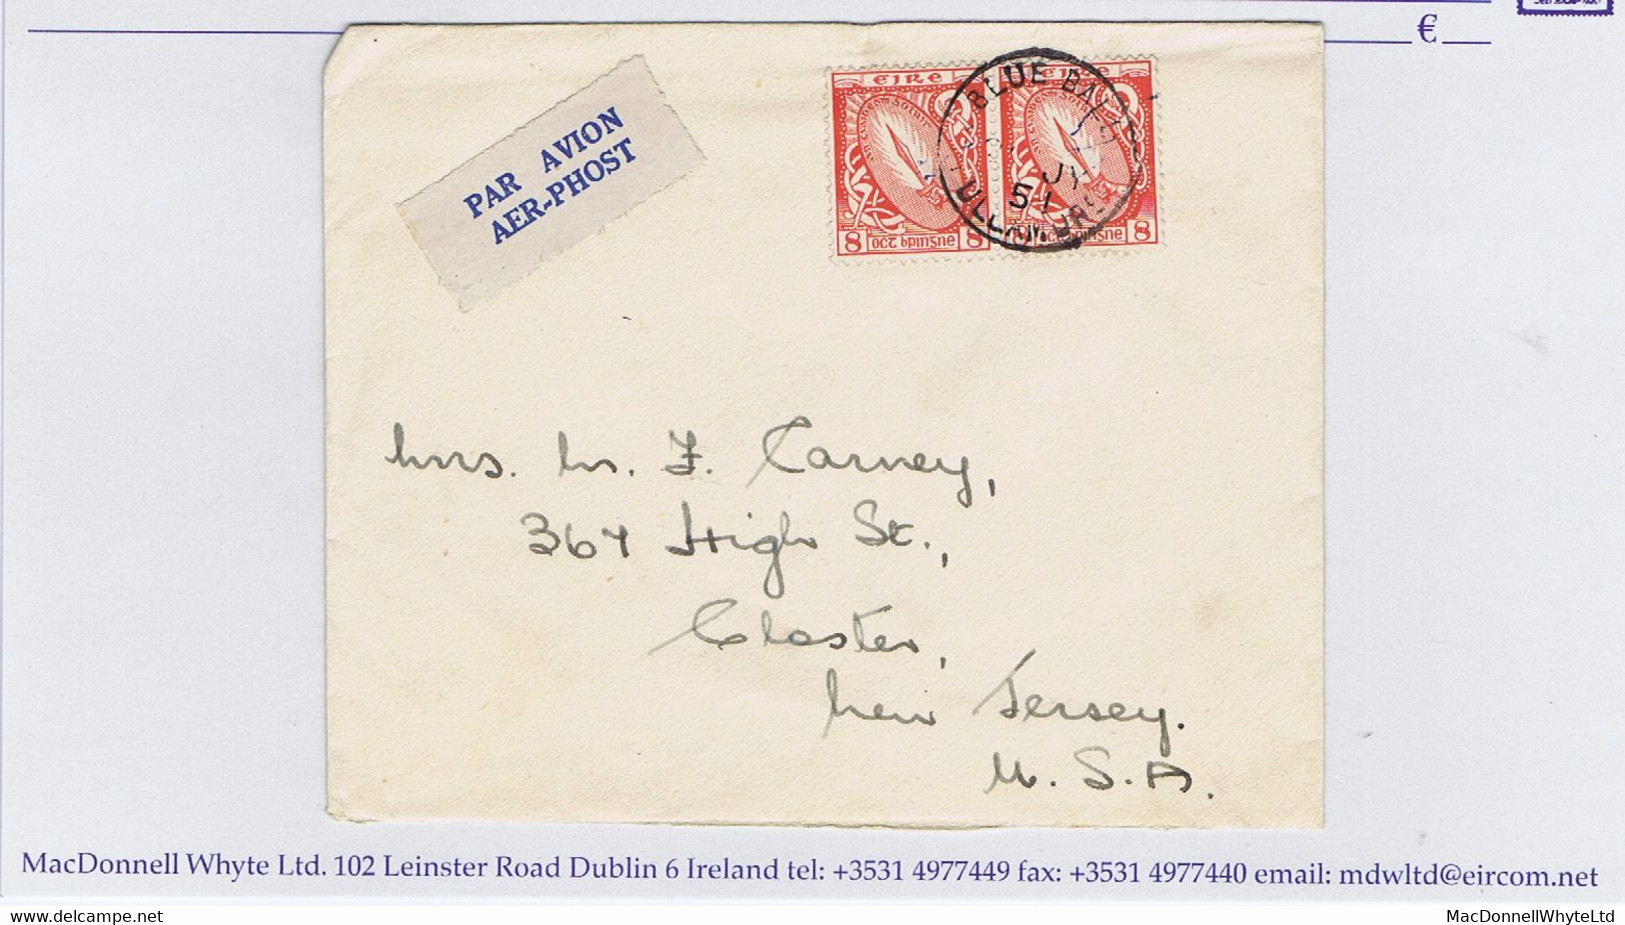 Ireland Airmail Offaly 1s4d Rate 1949 8d Sword Pair Paying 16pence Airmail Rate On Cover To USA Tied BLUE BALL Cds - Luftpost